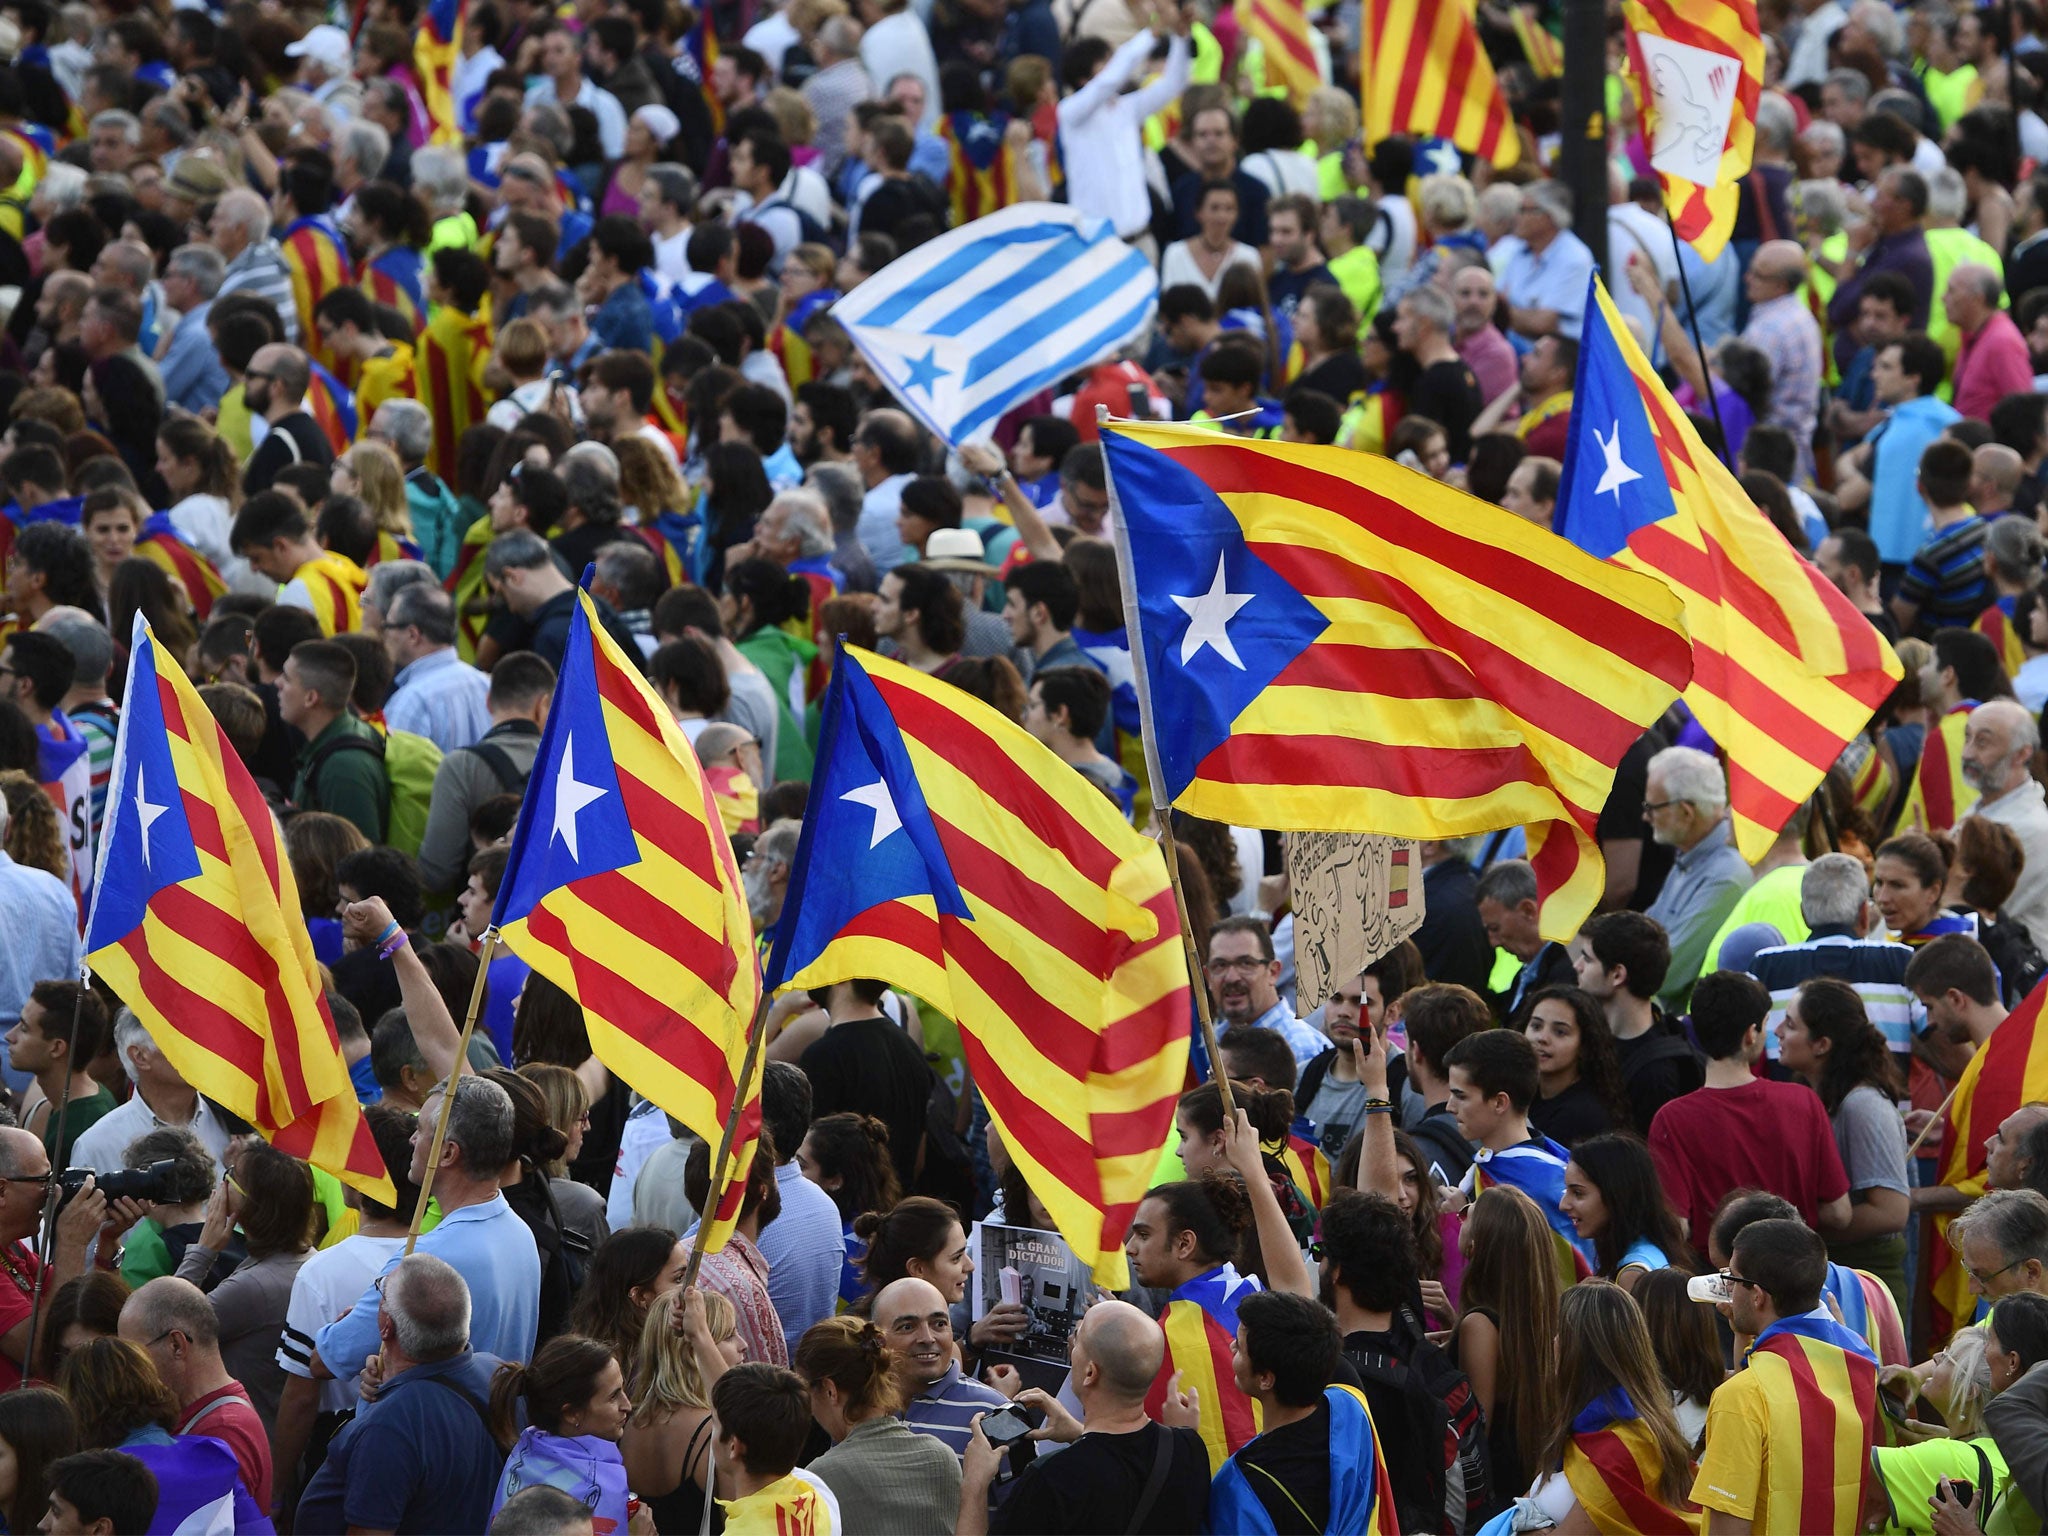 Catalan pro-independence groups are campaigning for a 'Yes' vote in the 1 October referendum